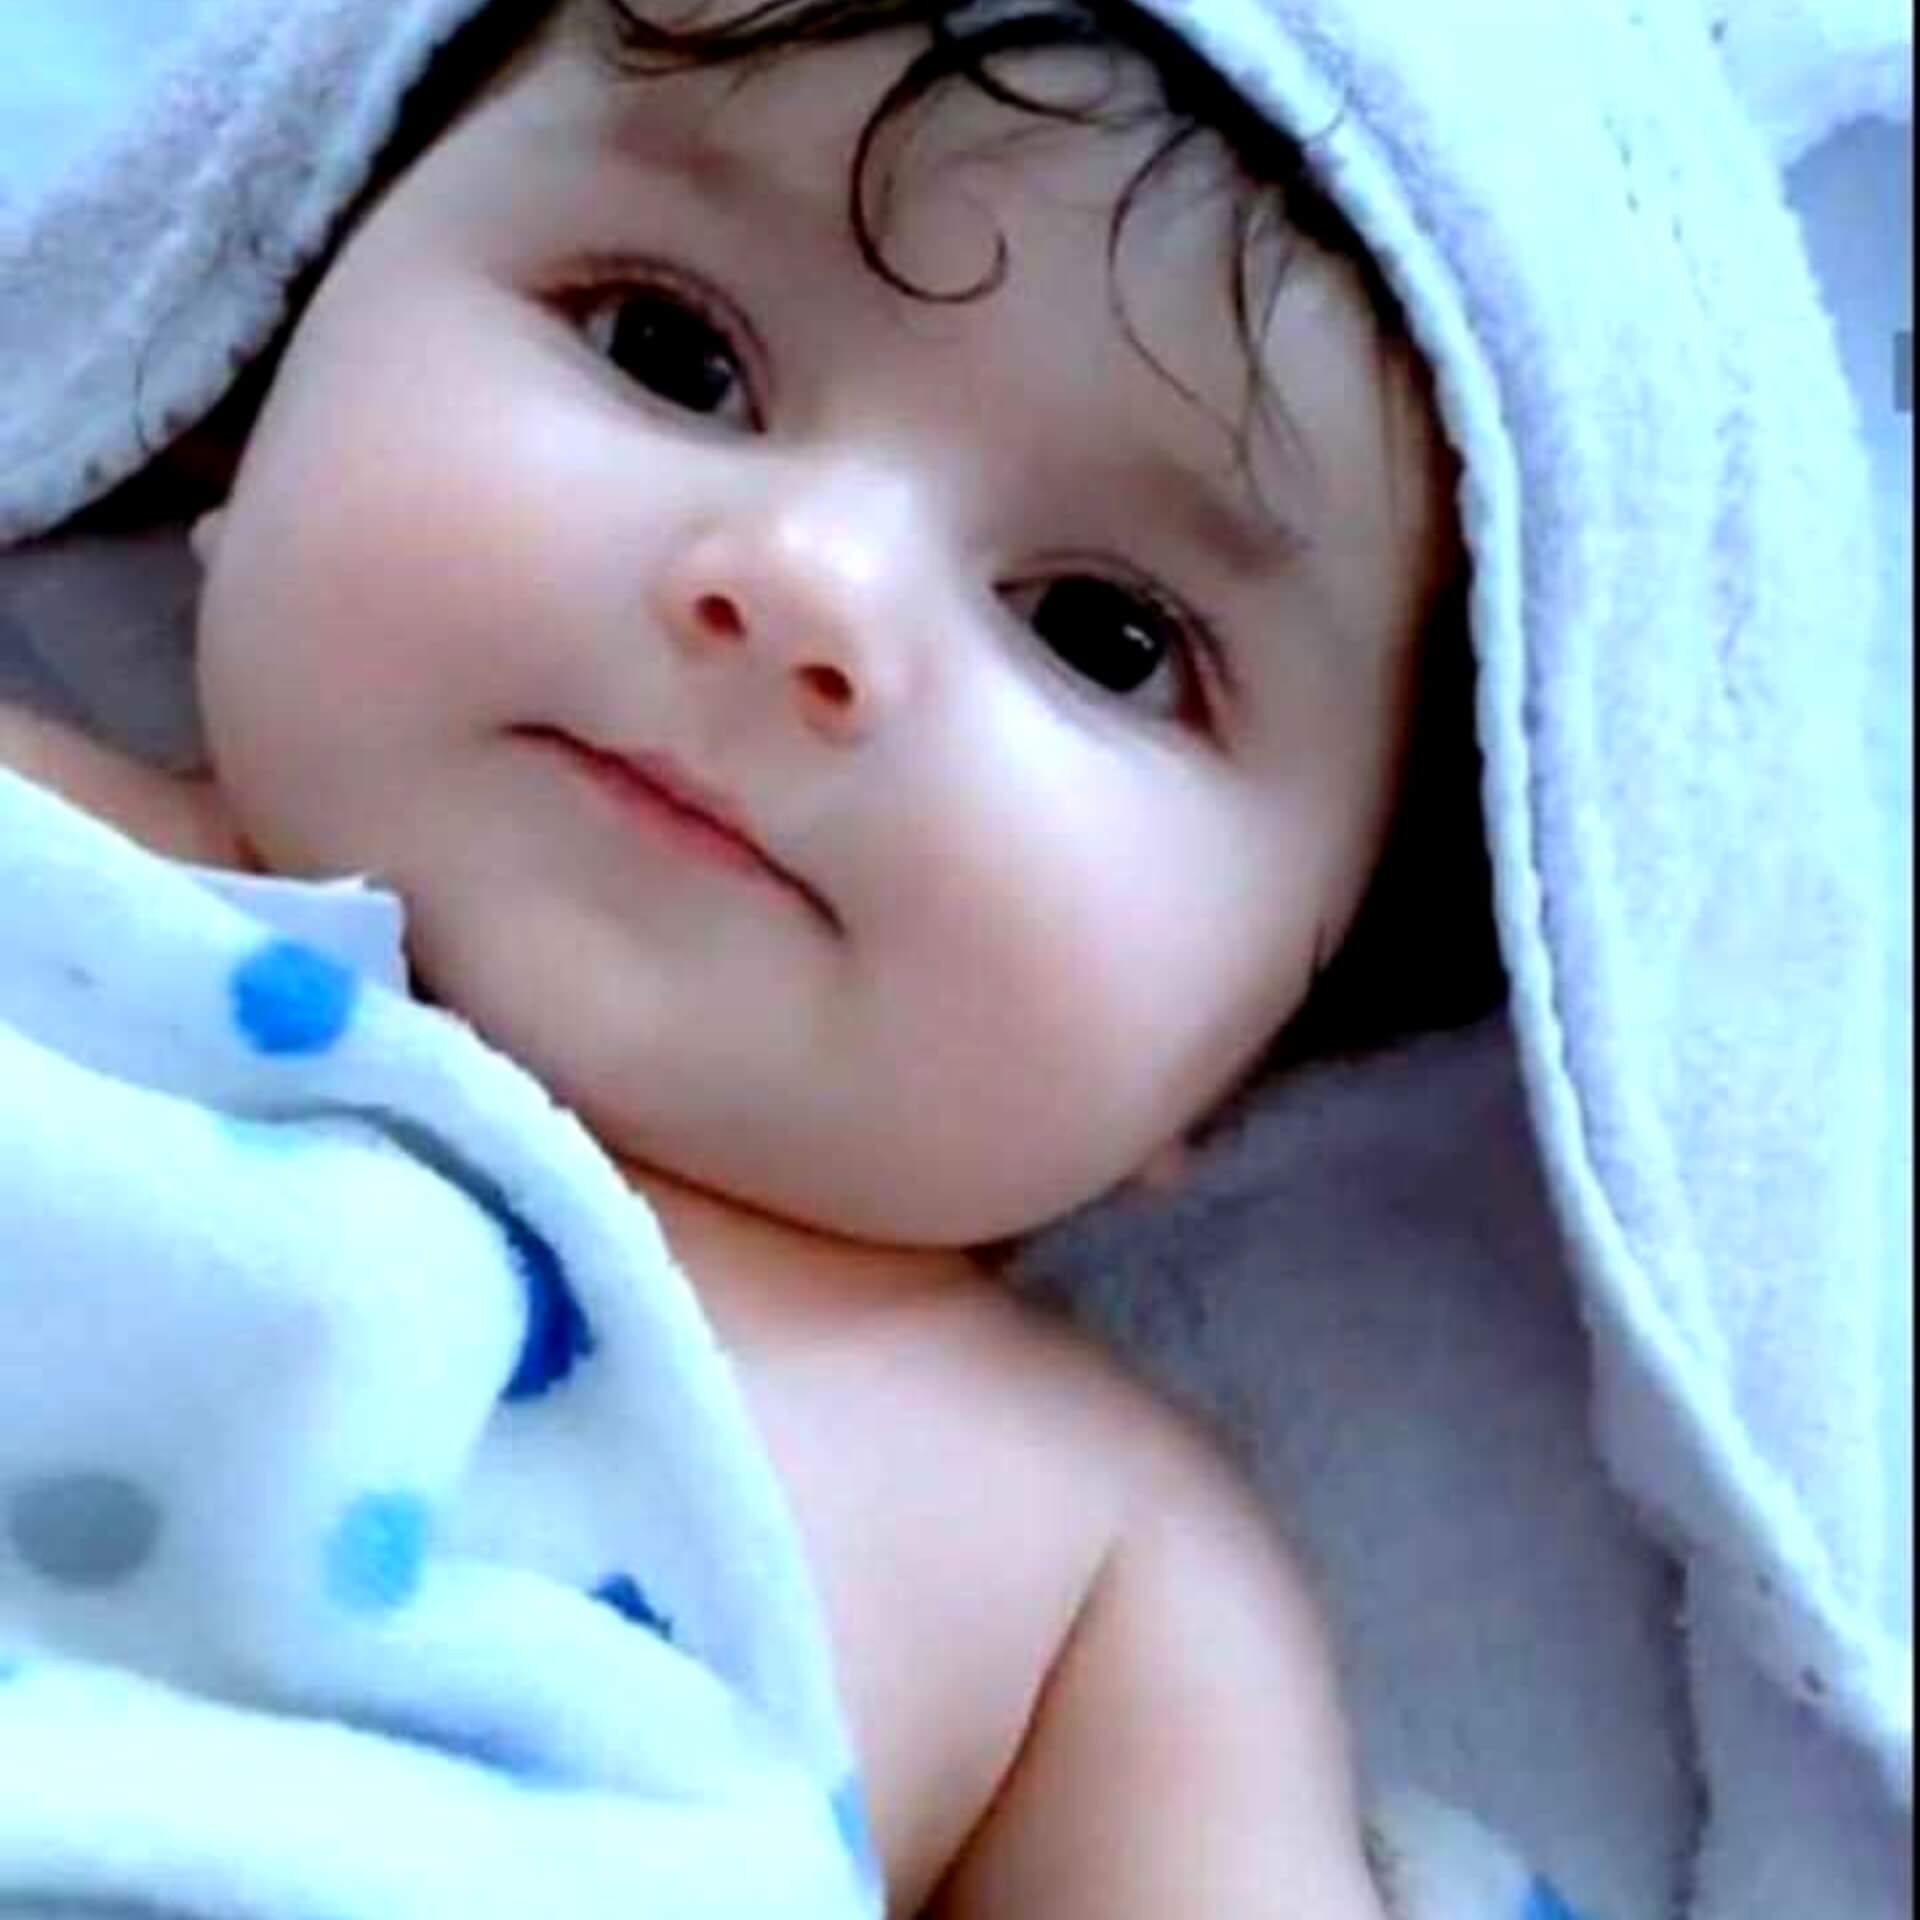 Cute Baby Boys & Girls Whatsapp DP Images for Mobile 458+ DP For Mobile